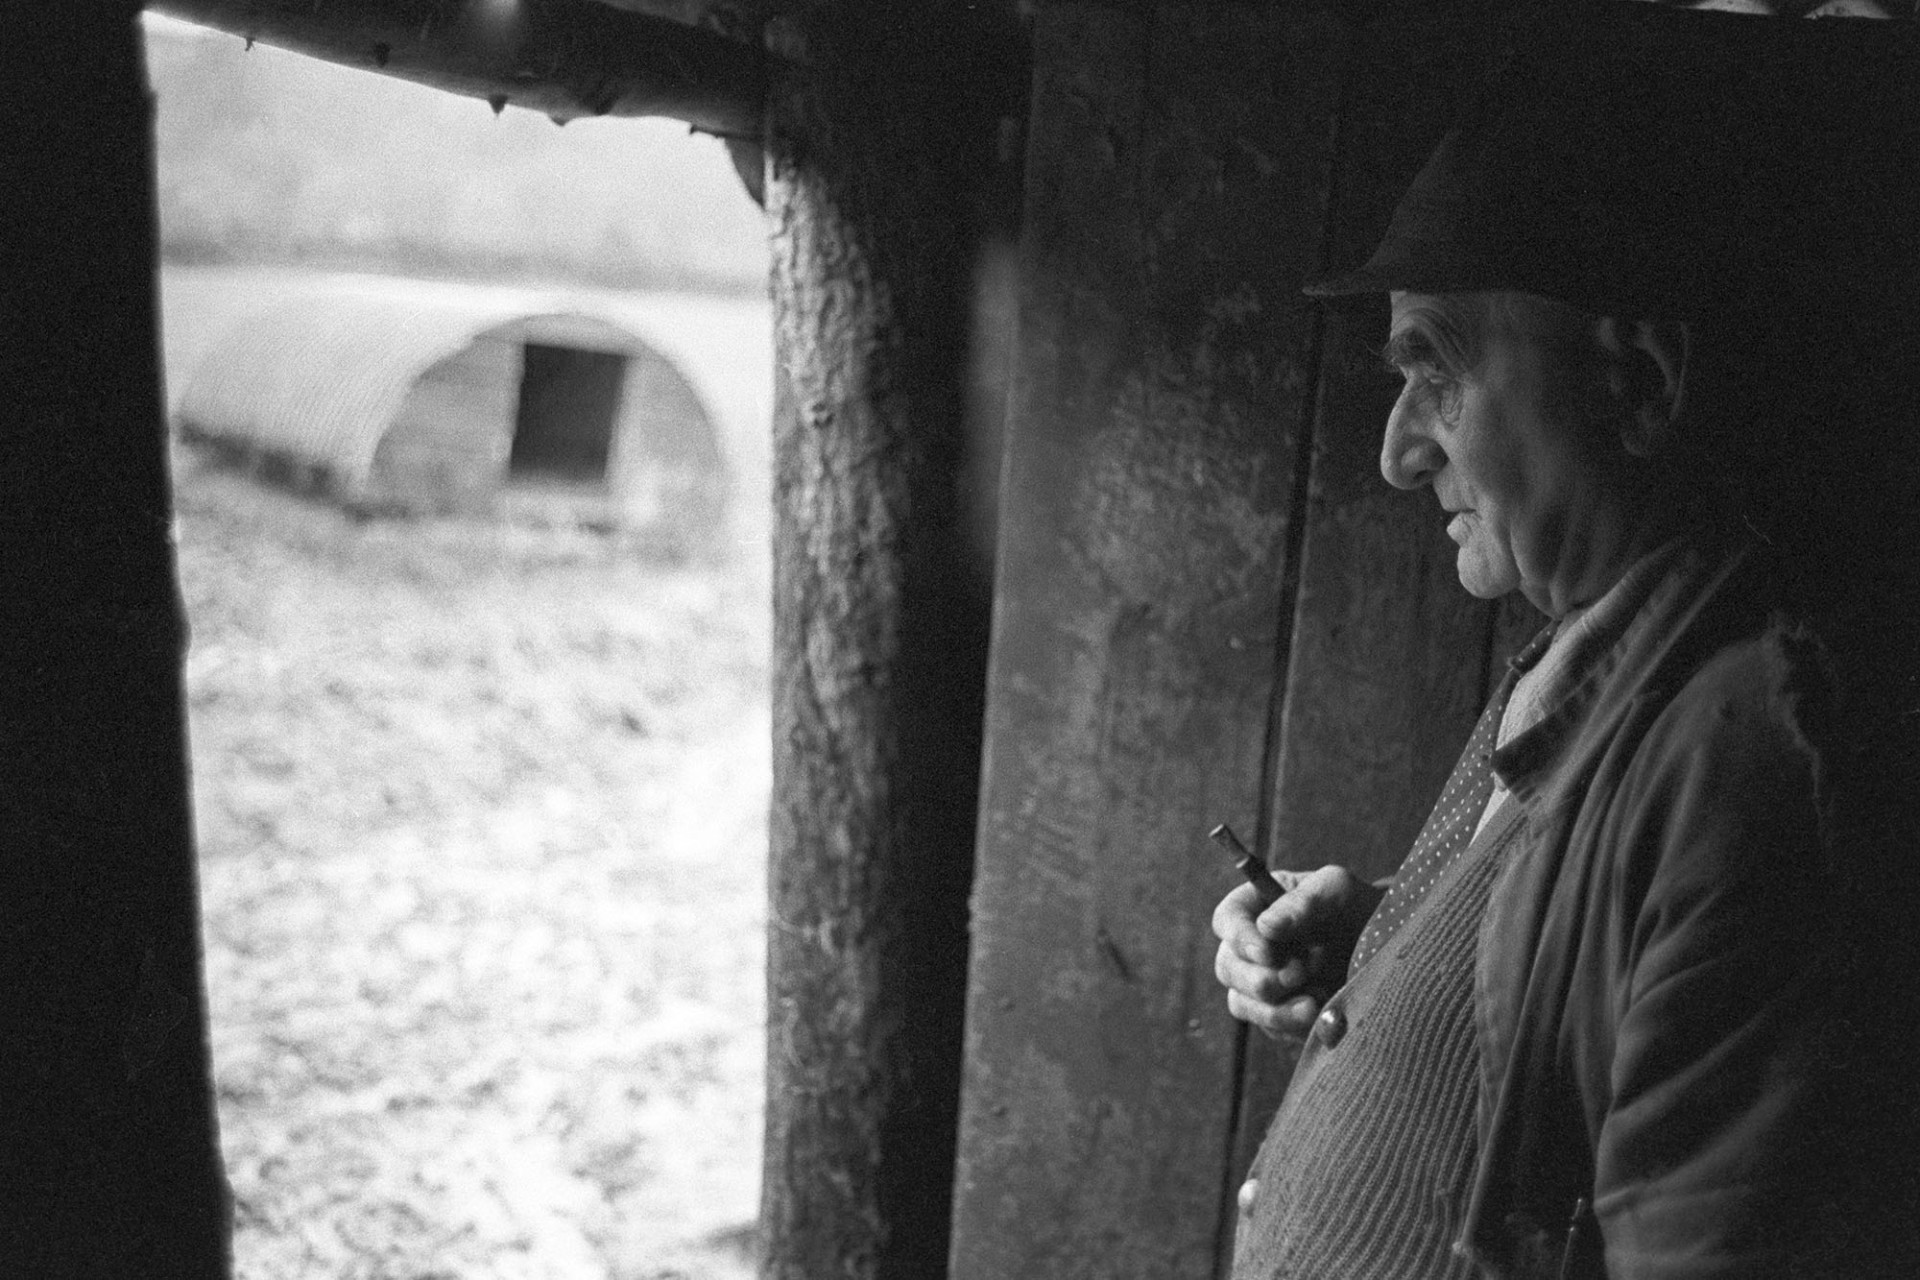 Man sheltering in shed.
[Archie Parkhouse sheltering in the doorway of a shed at Millhams in Dolton.]